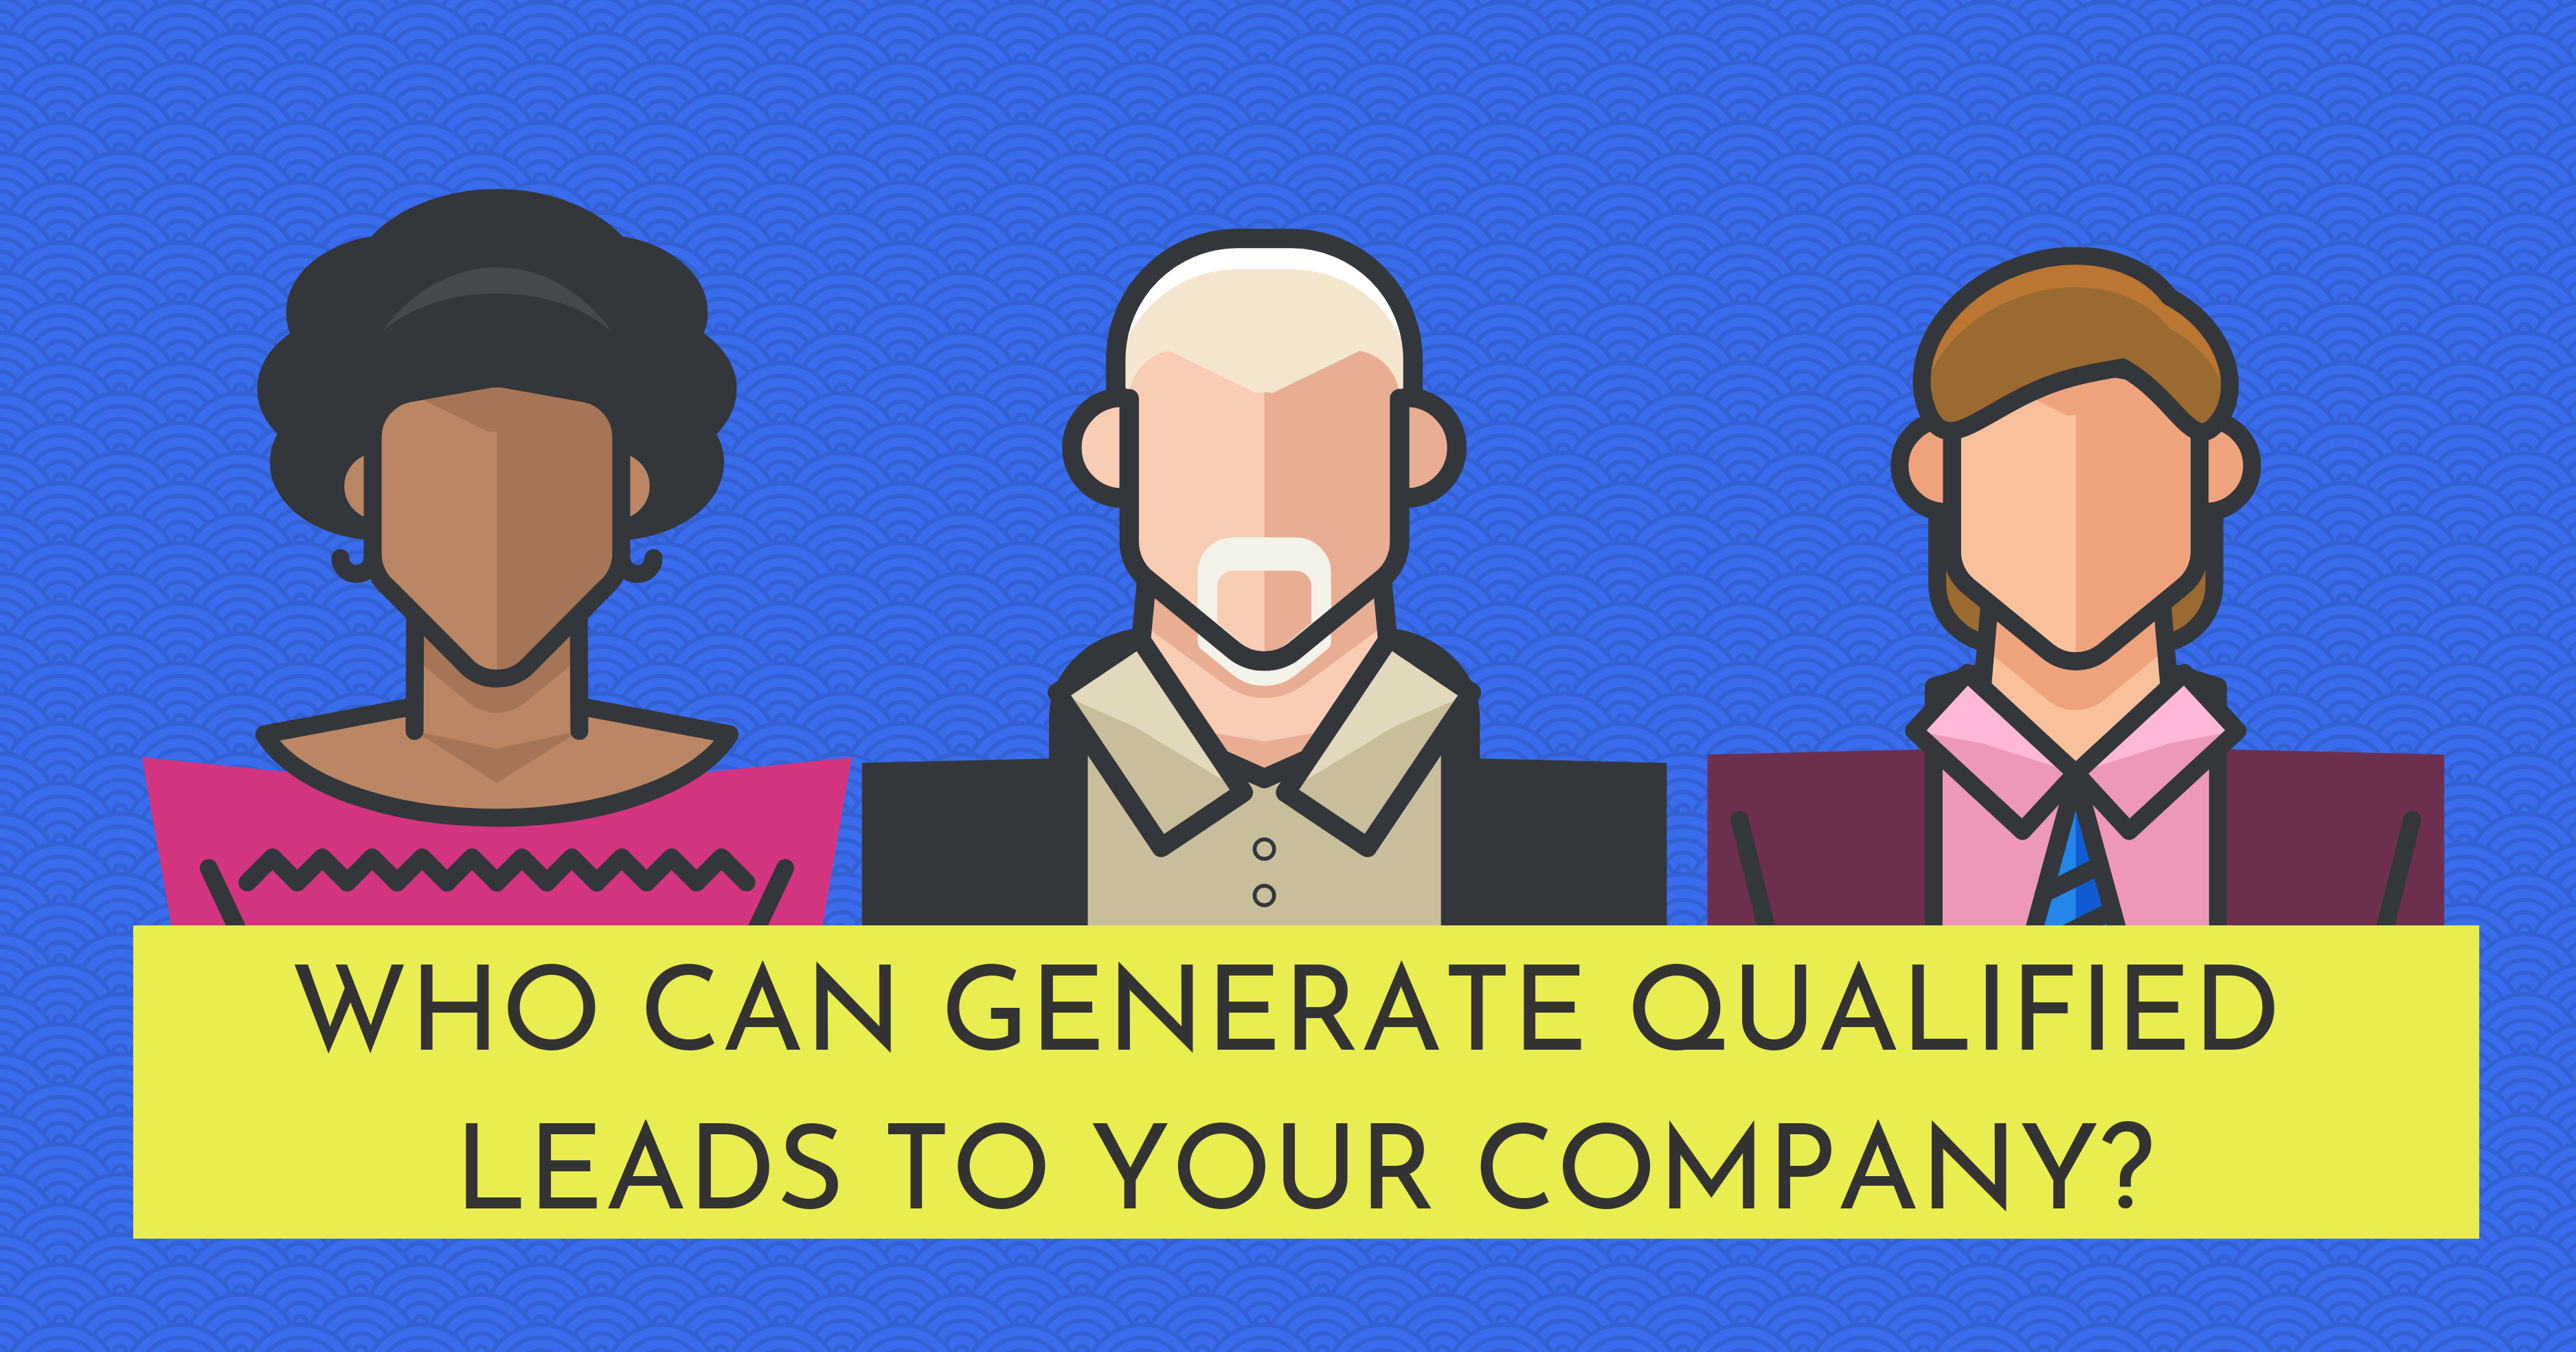 Who Can Generate Qualified Leads to Your Company?